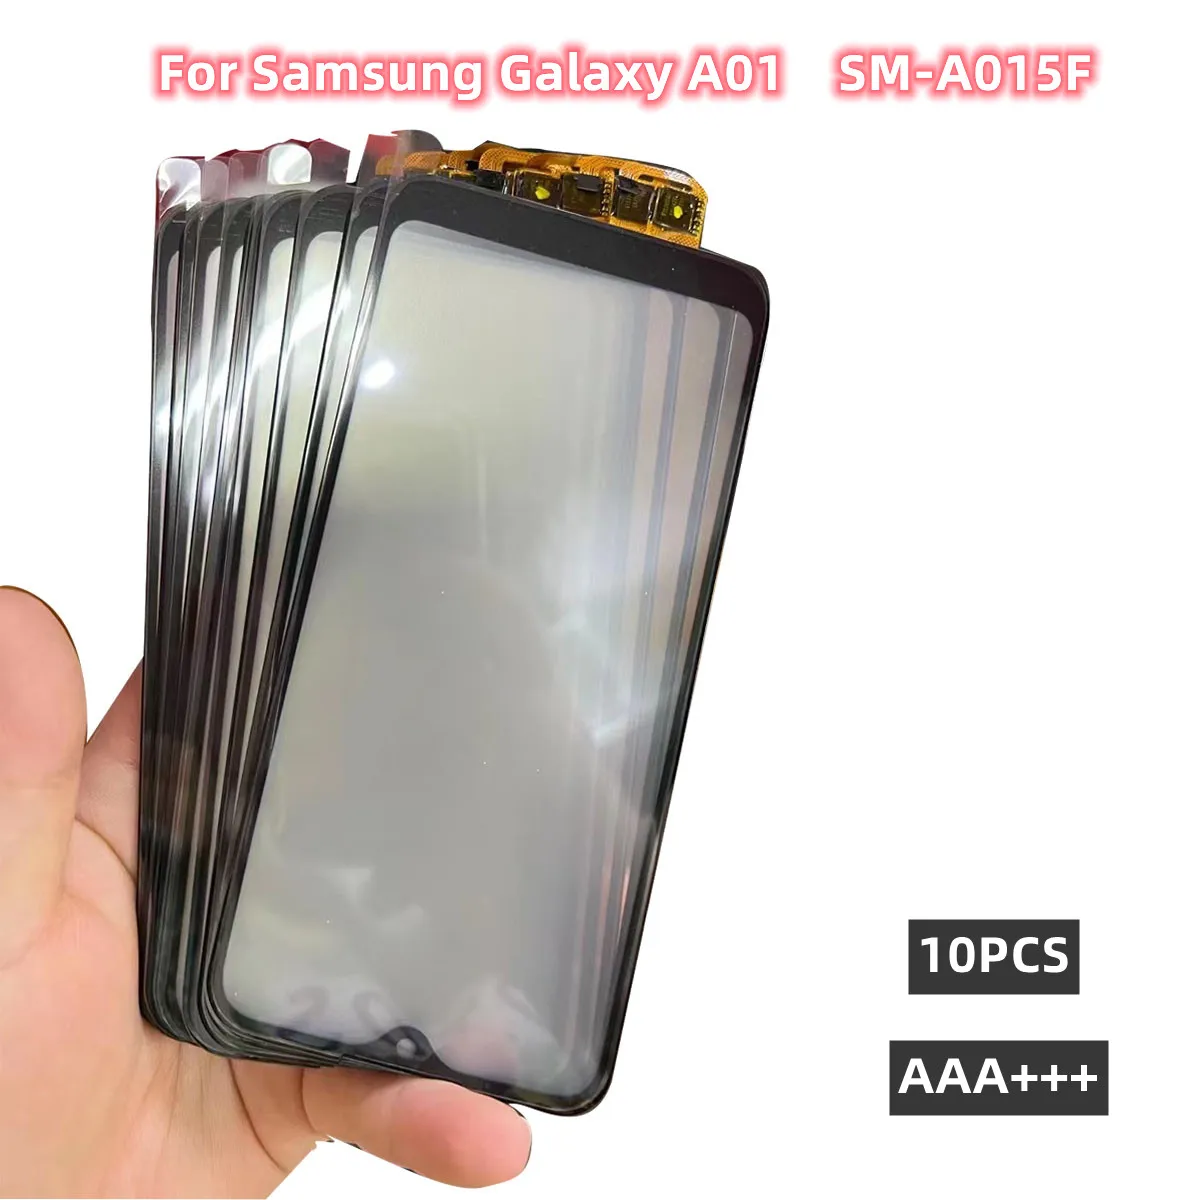 

10PCS Touchscreen With OCA Laminated For Samsung Galaxy A01 A015F/D Touch Screen Front Panel Glass Not LCD Display Sensor